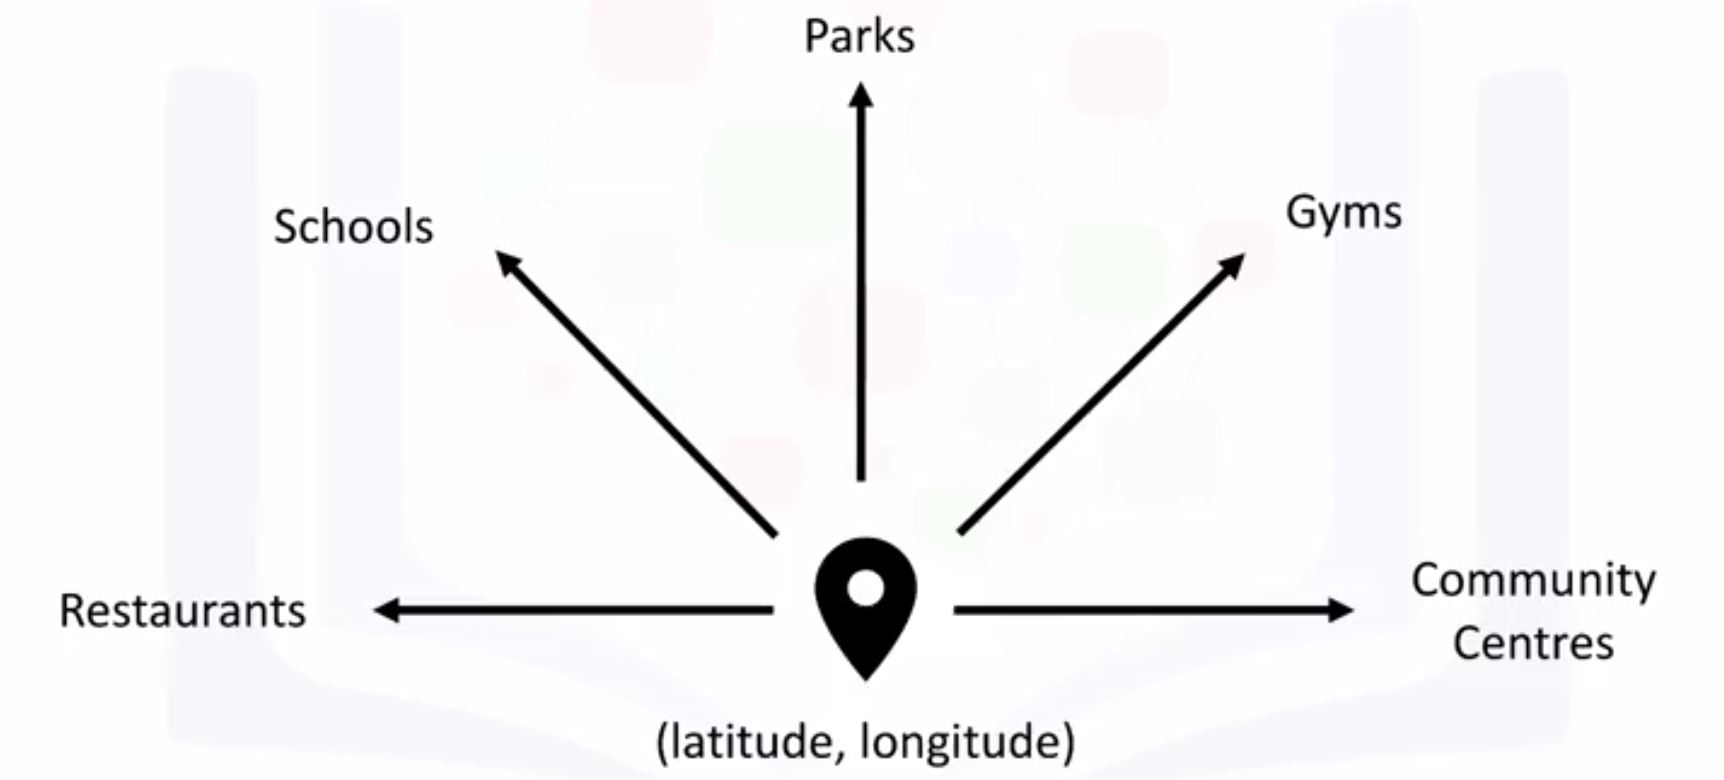 Example of location data